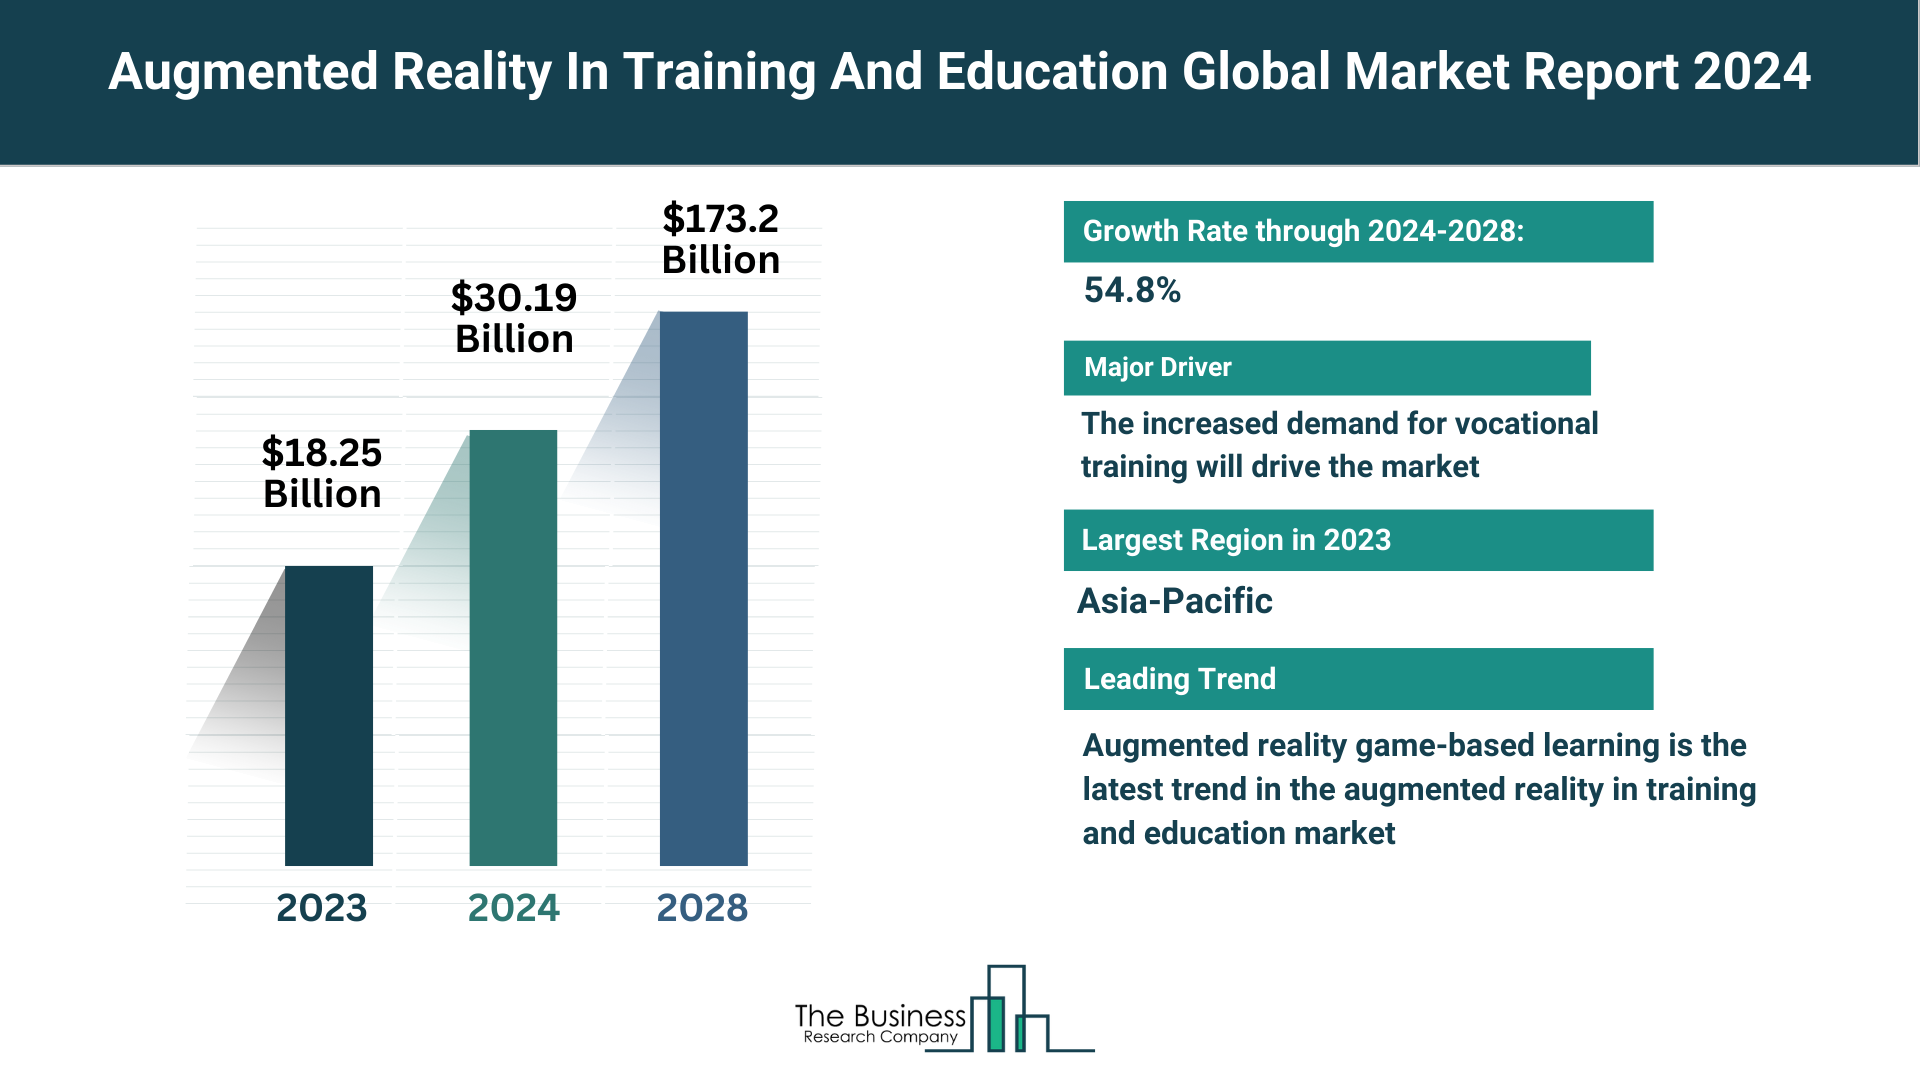 Global Augmented Reality In Training And Education Market